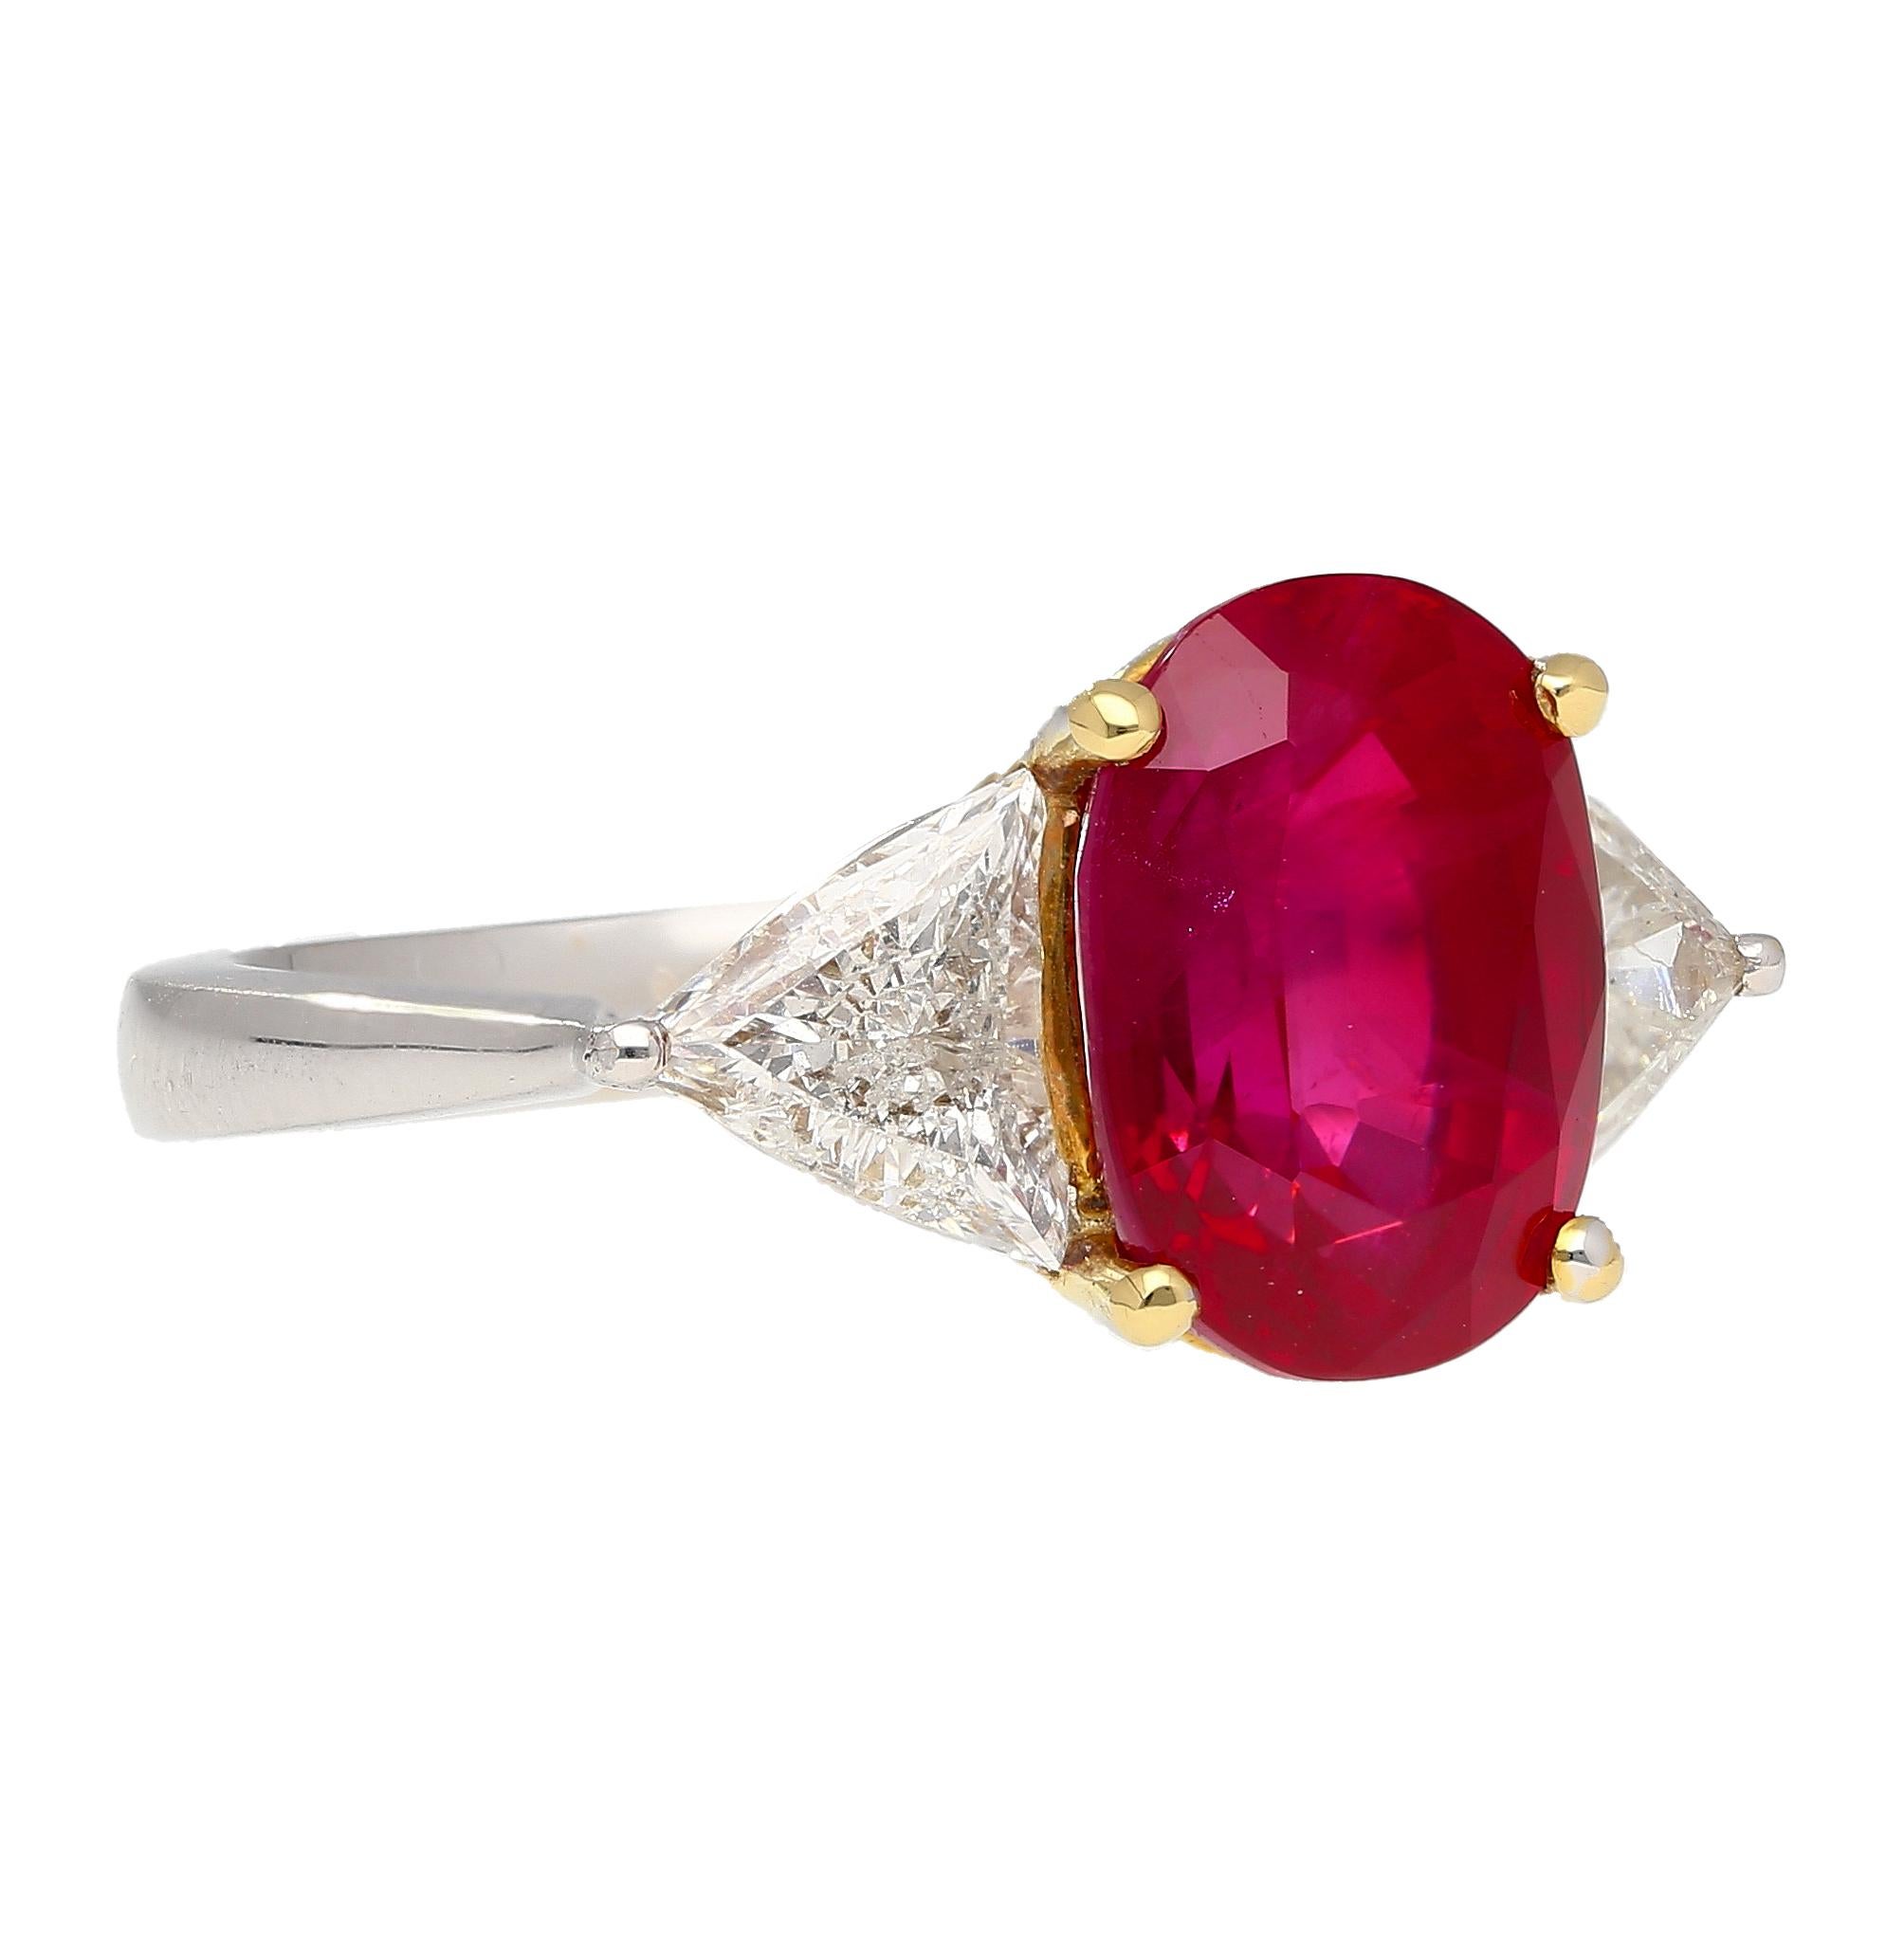 Indulge in sophistication with this ruby and diamond three stone ring ring. Gubelin certified, this natural 4.47 carat oval cut red ruby is accompanied by two triangular shaped diamond side stones of 0.83 CTTW. Set in an 18k white and yellow gold